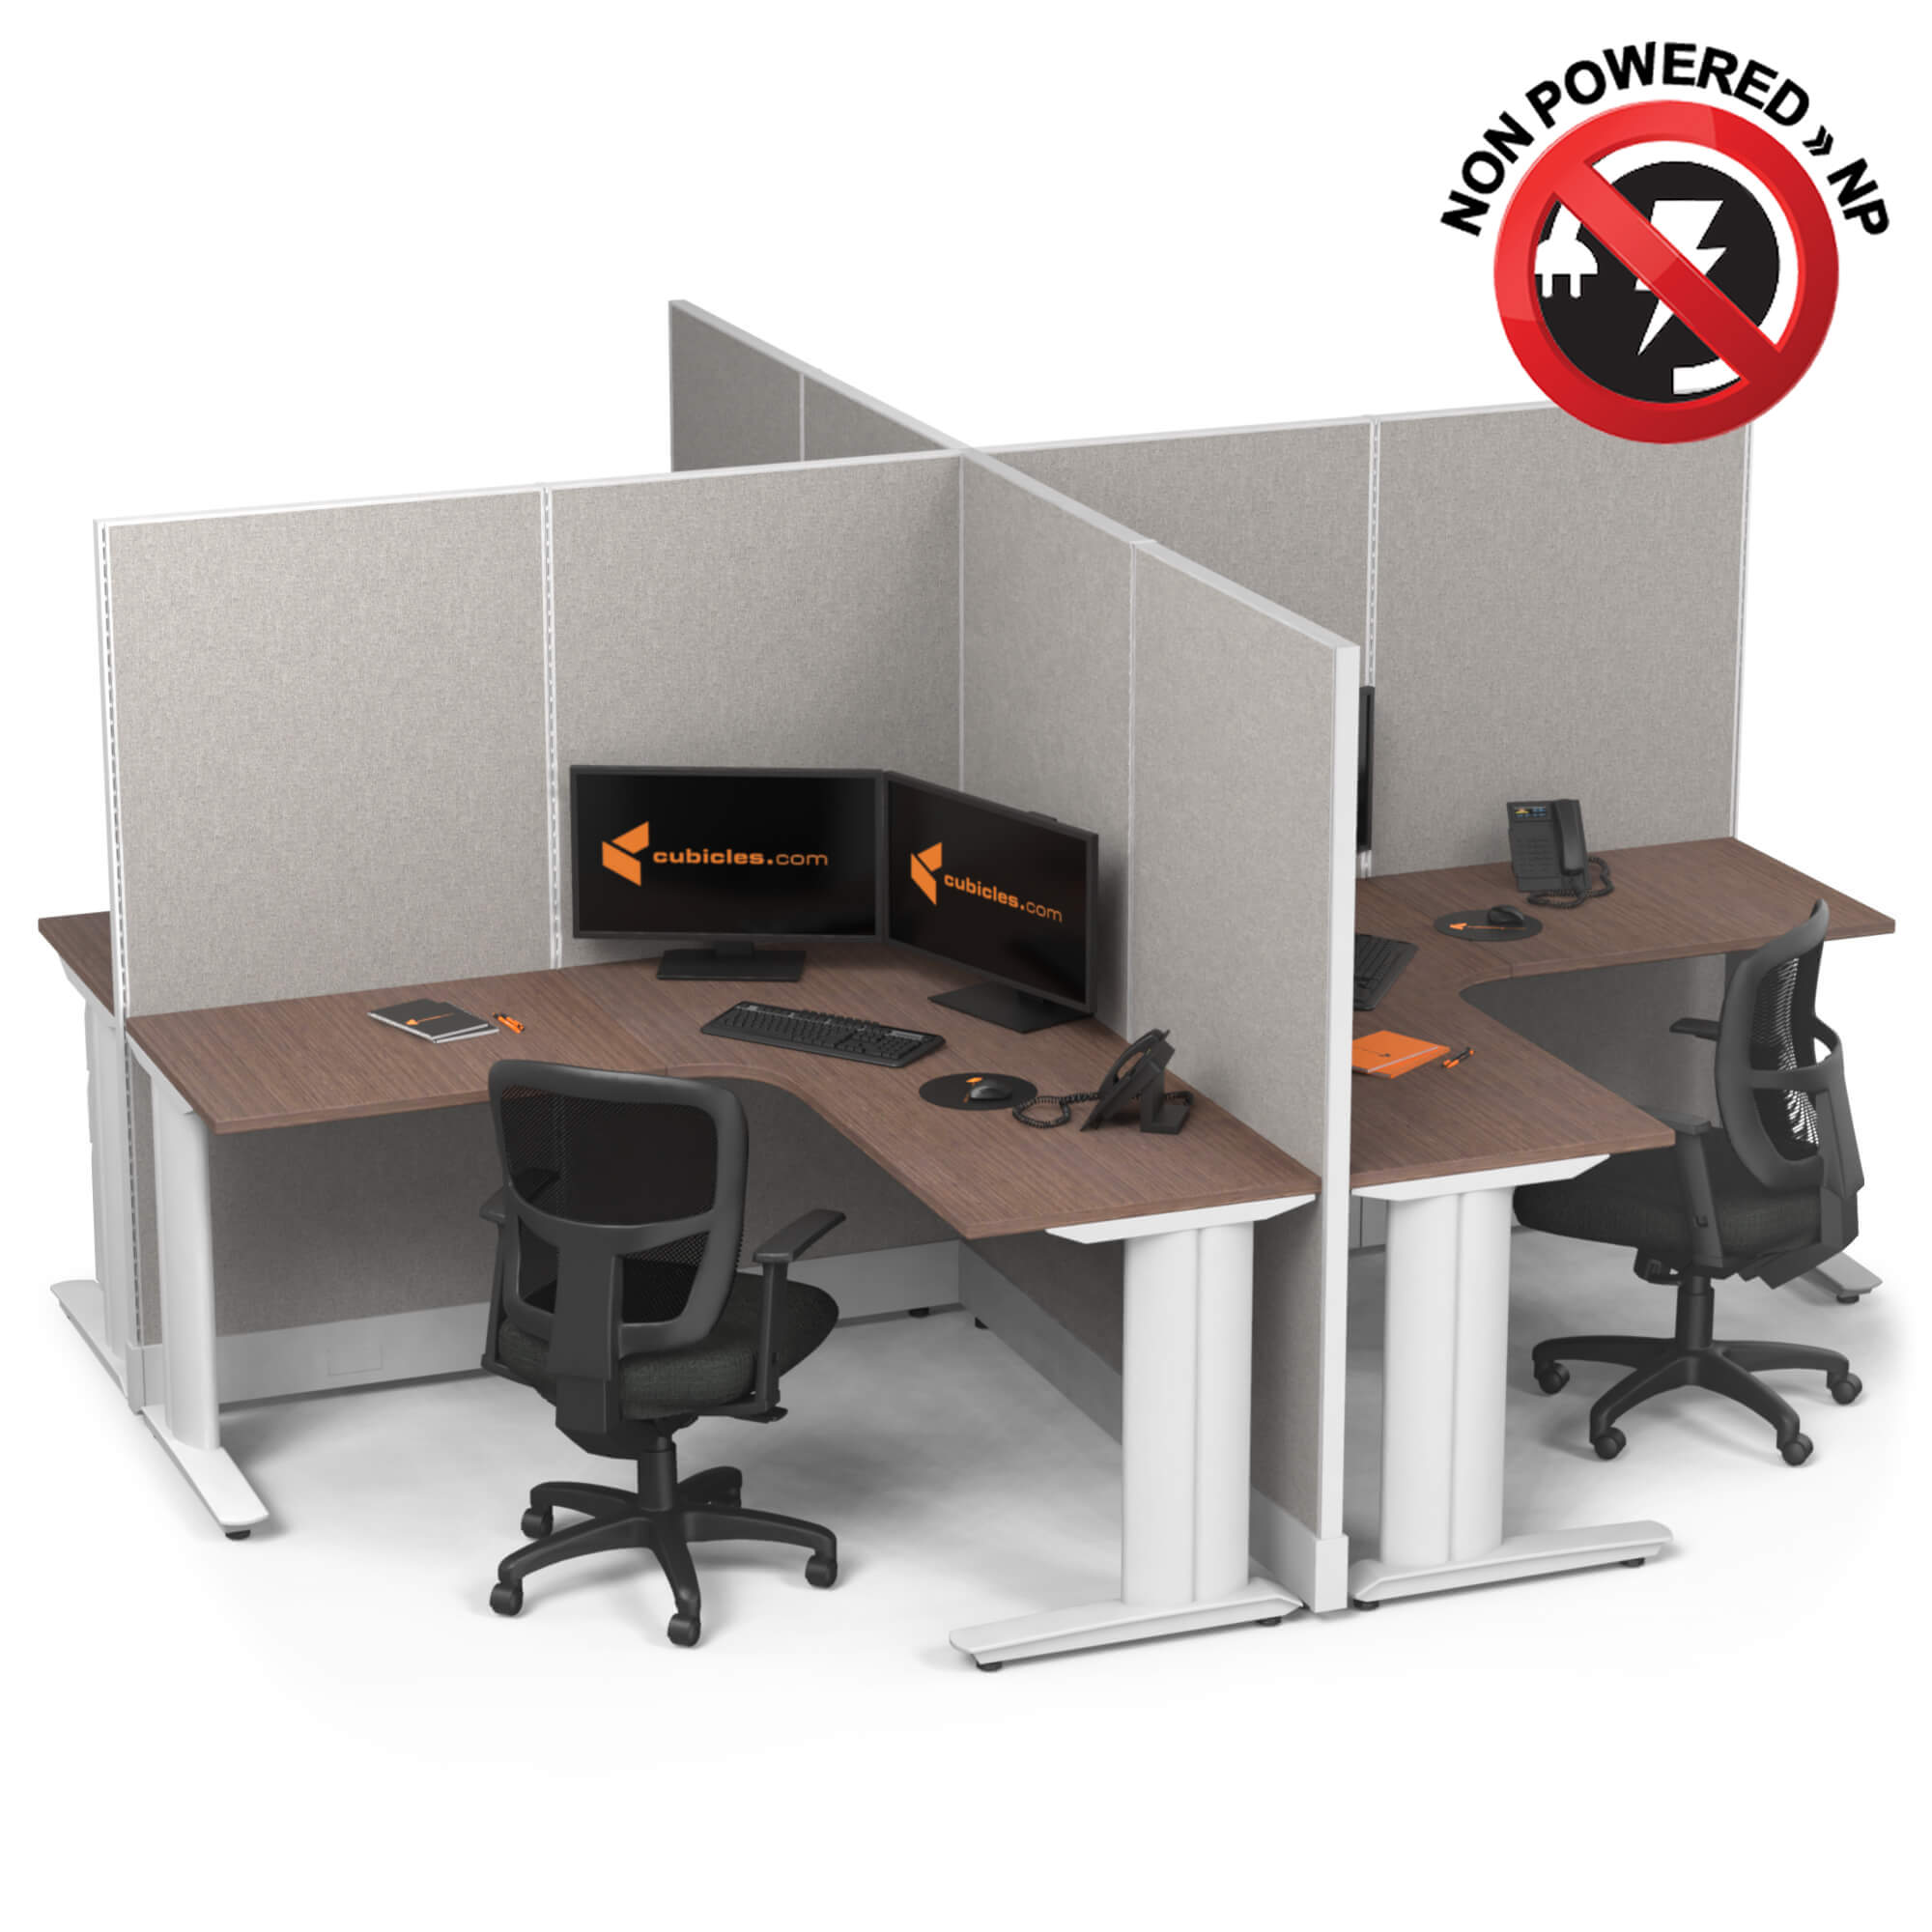 cubicle-desk-l-shaped-4pack-x-cluster-non-powered.jpg